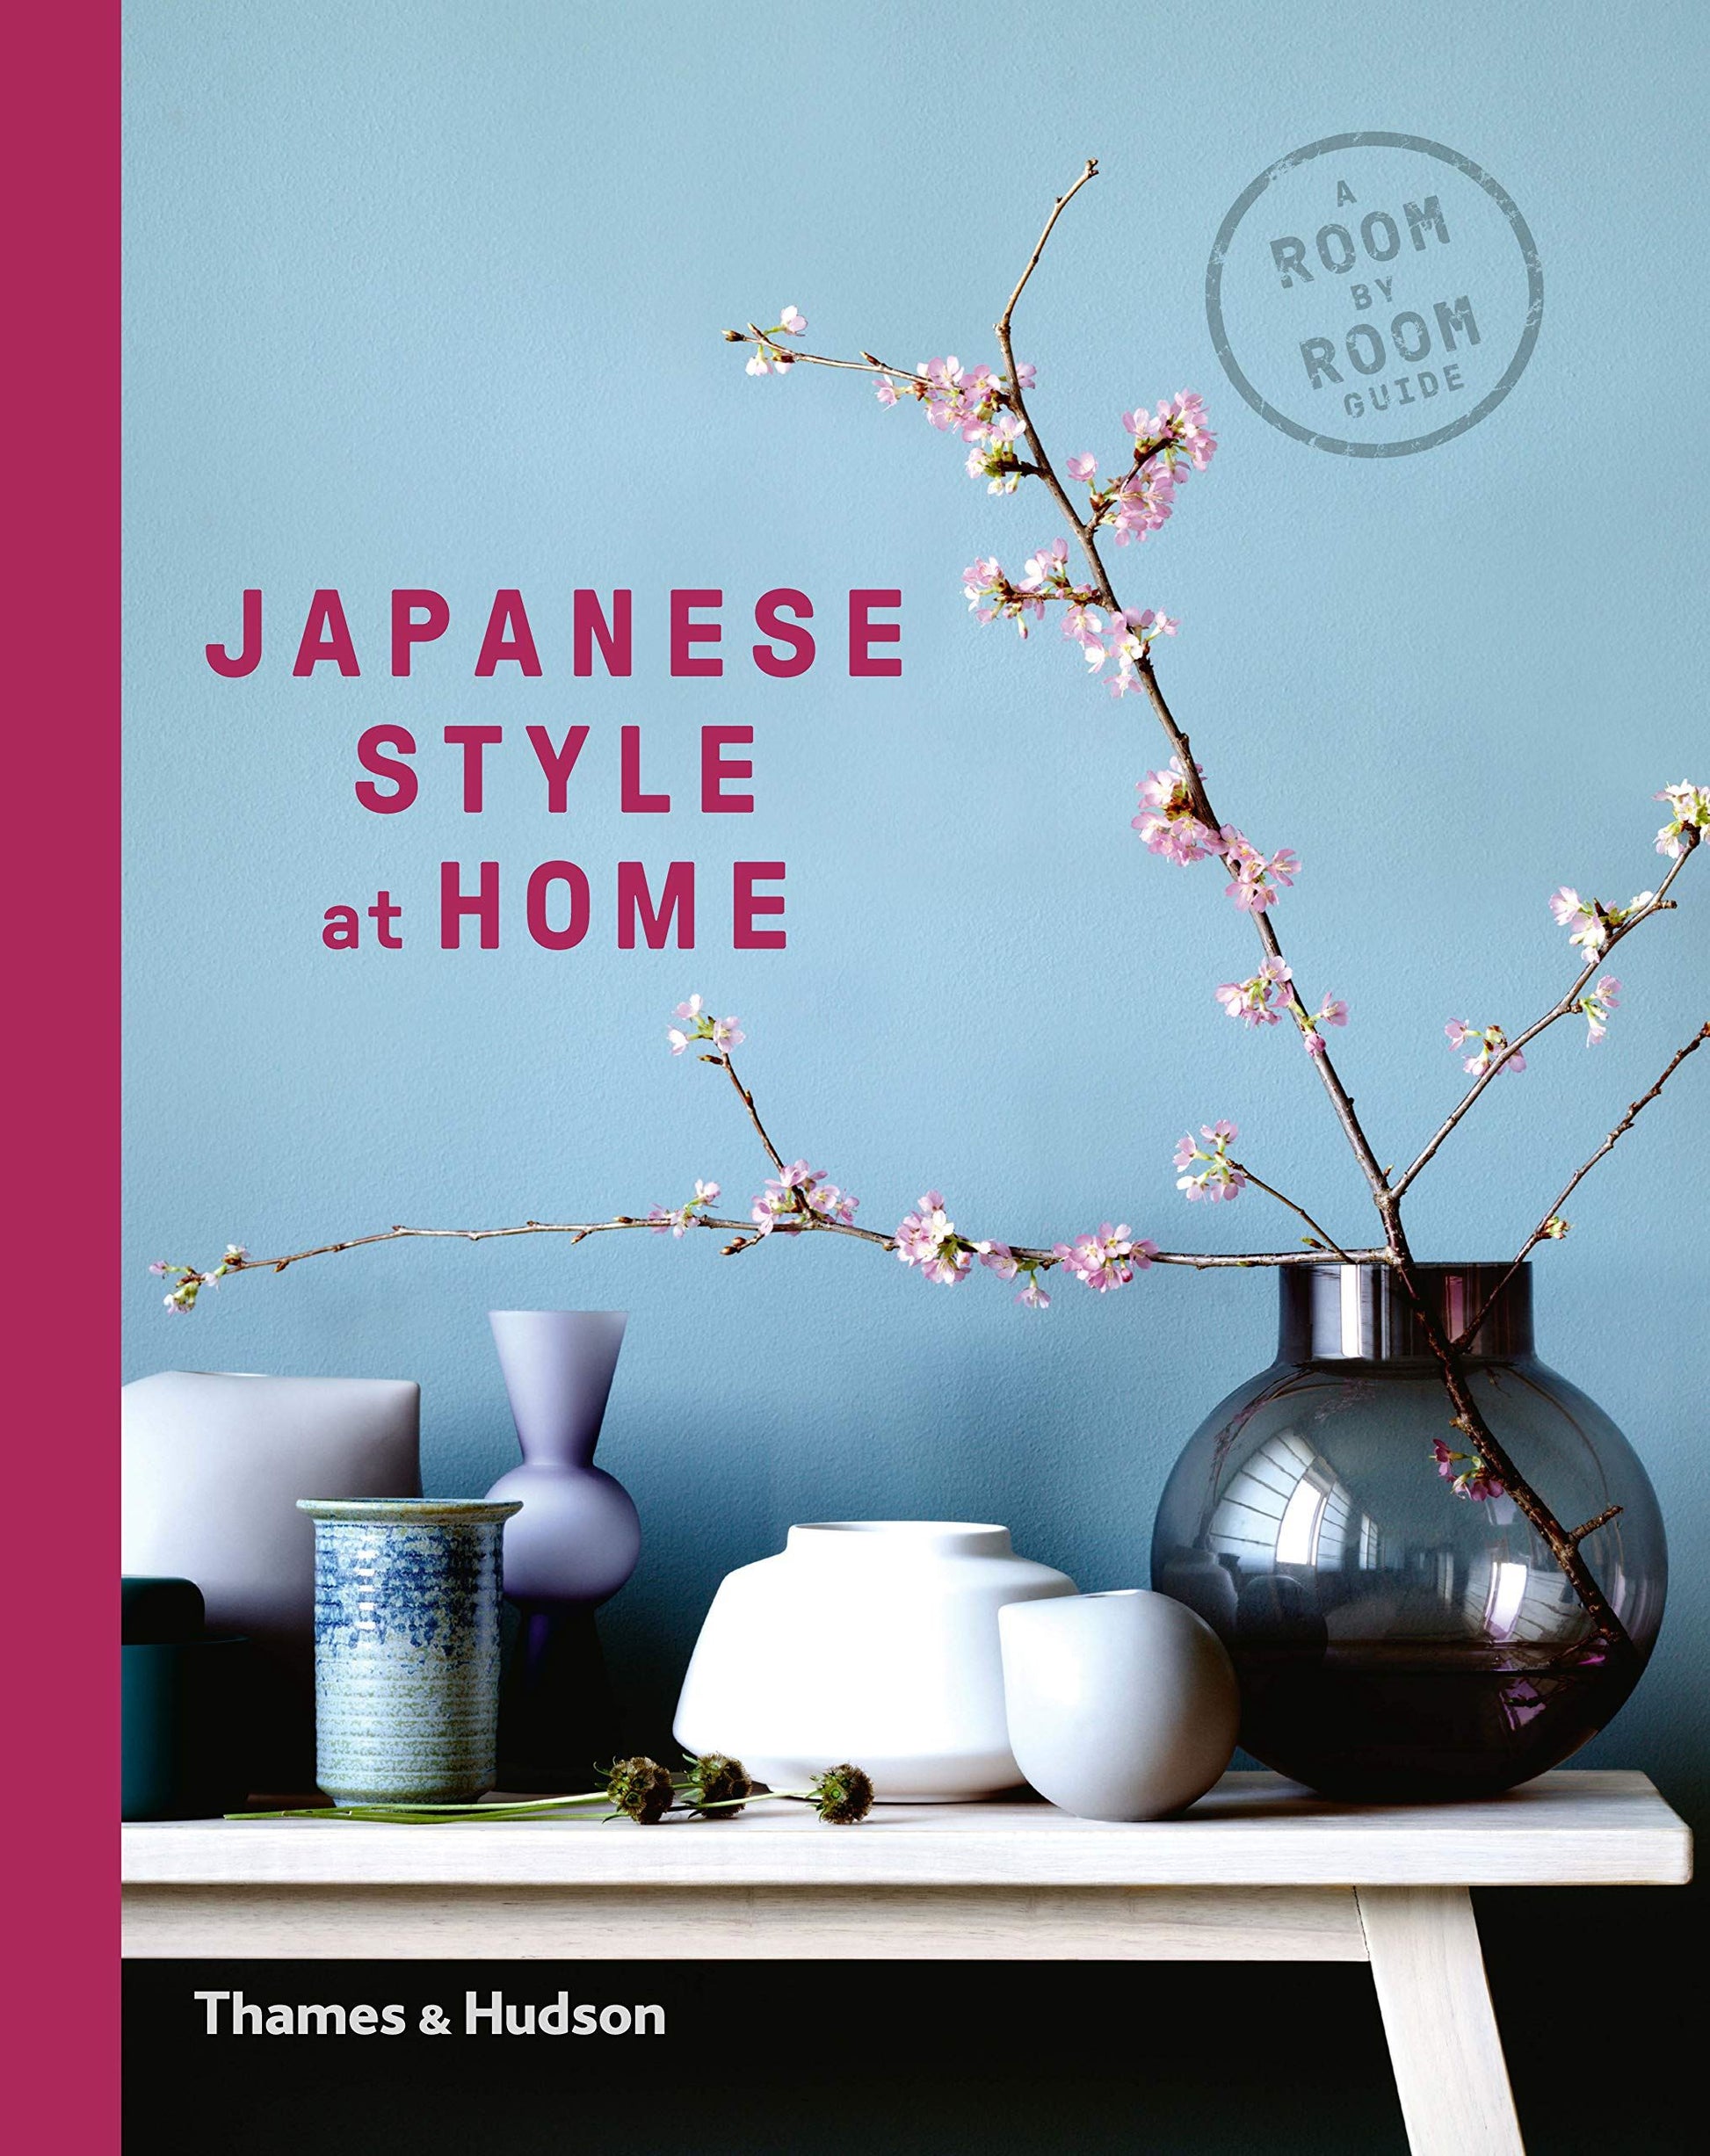 Book on Japanese Style at Home